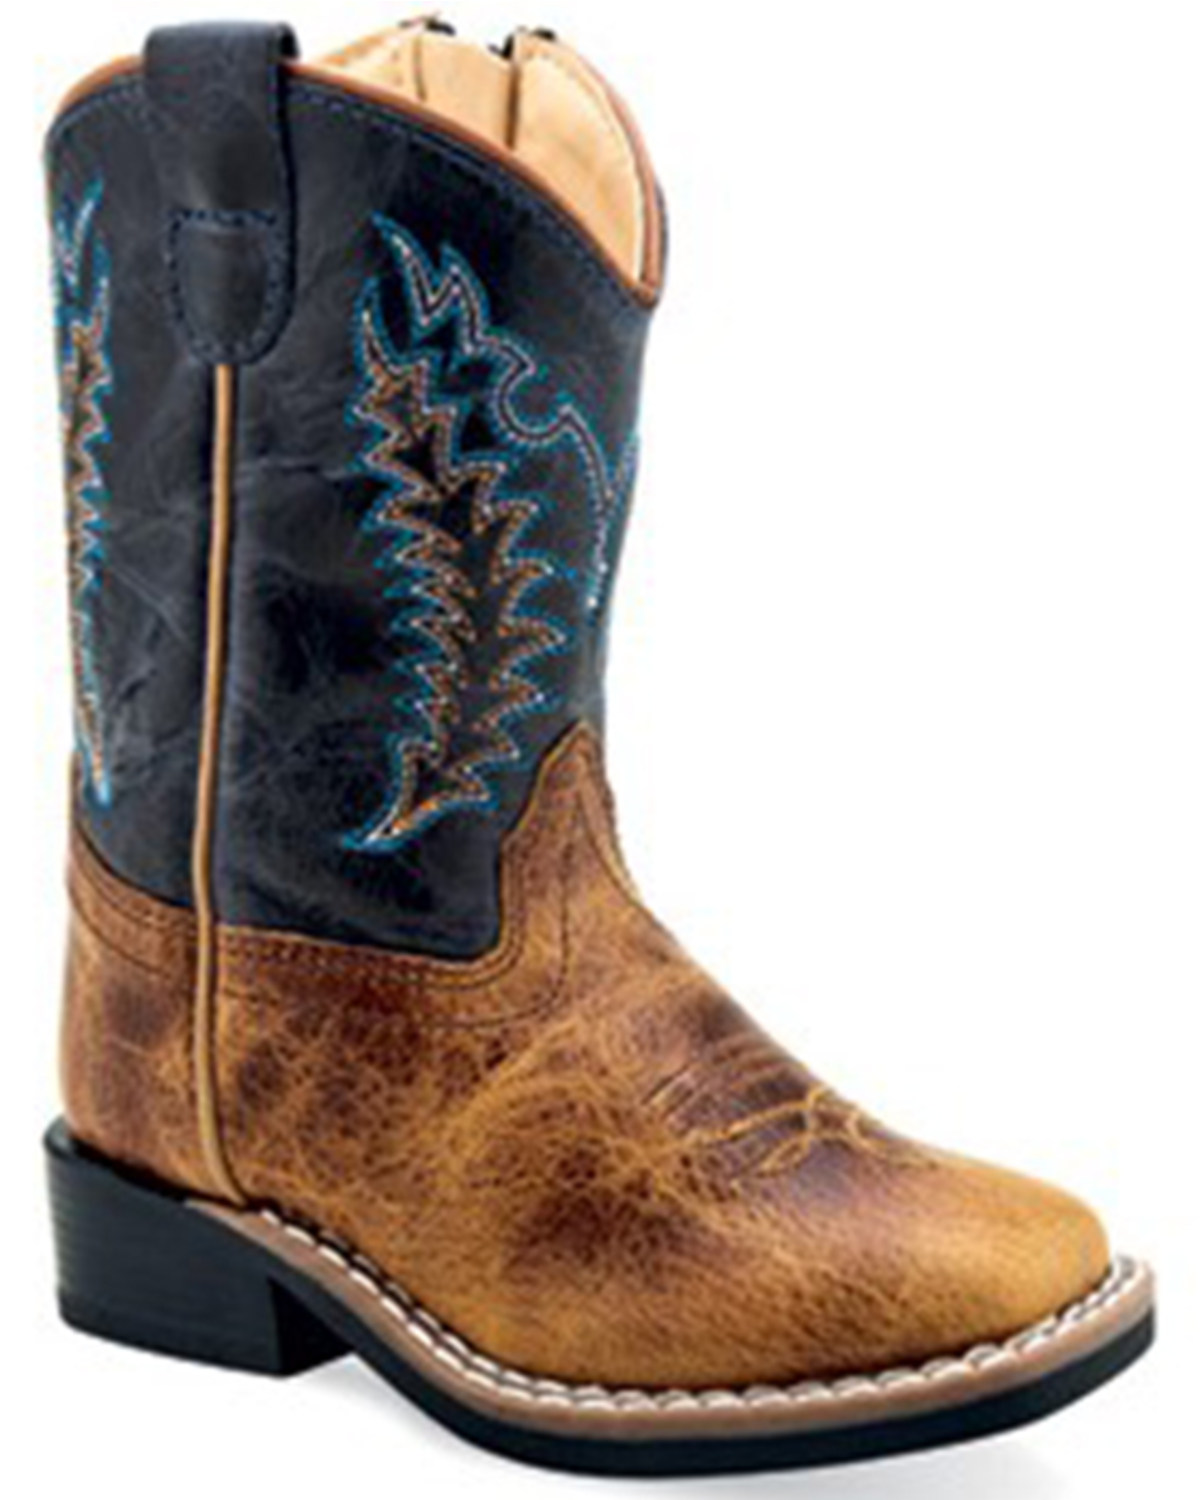 Old West Toddler Boys' Cactus Western Boots - Broad Square Toe